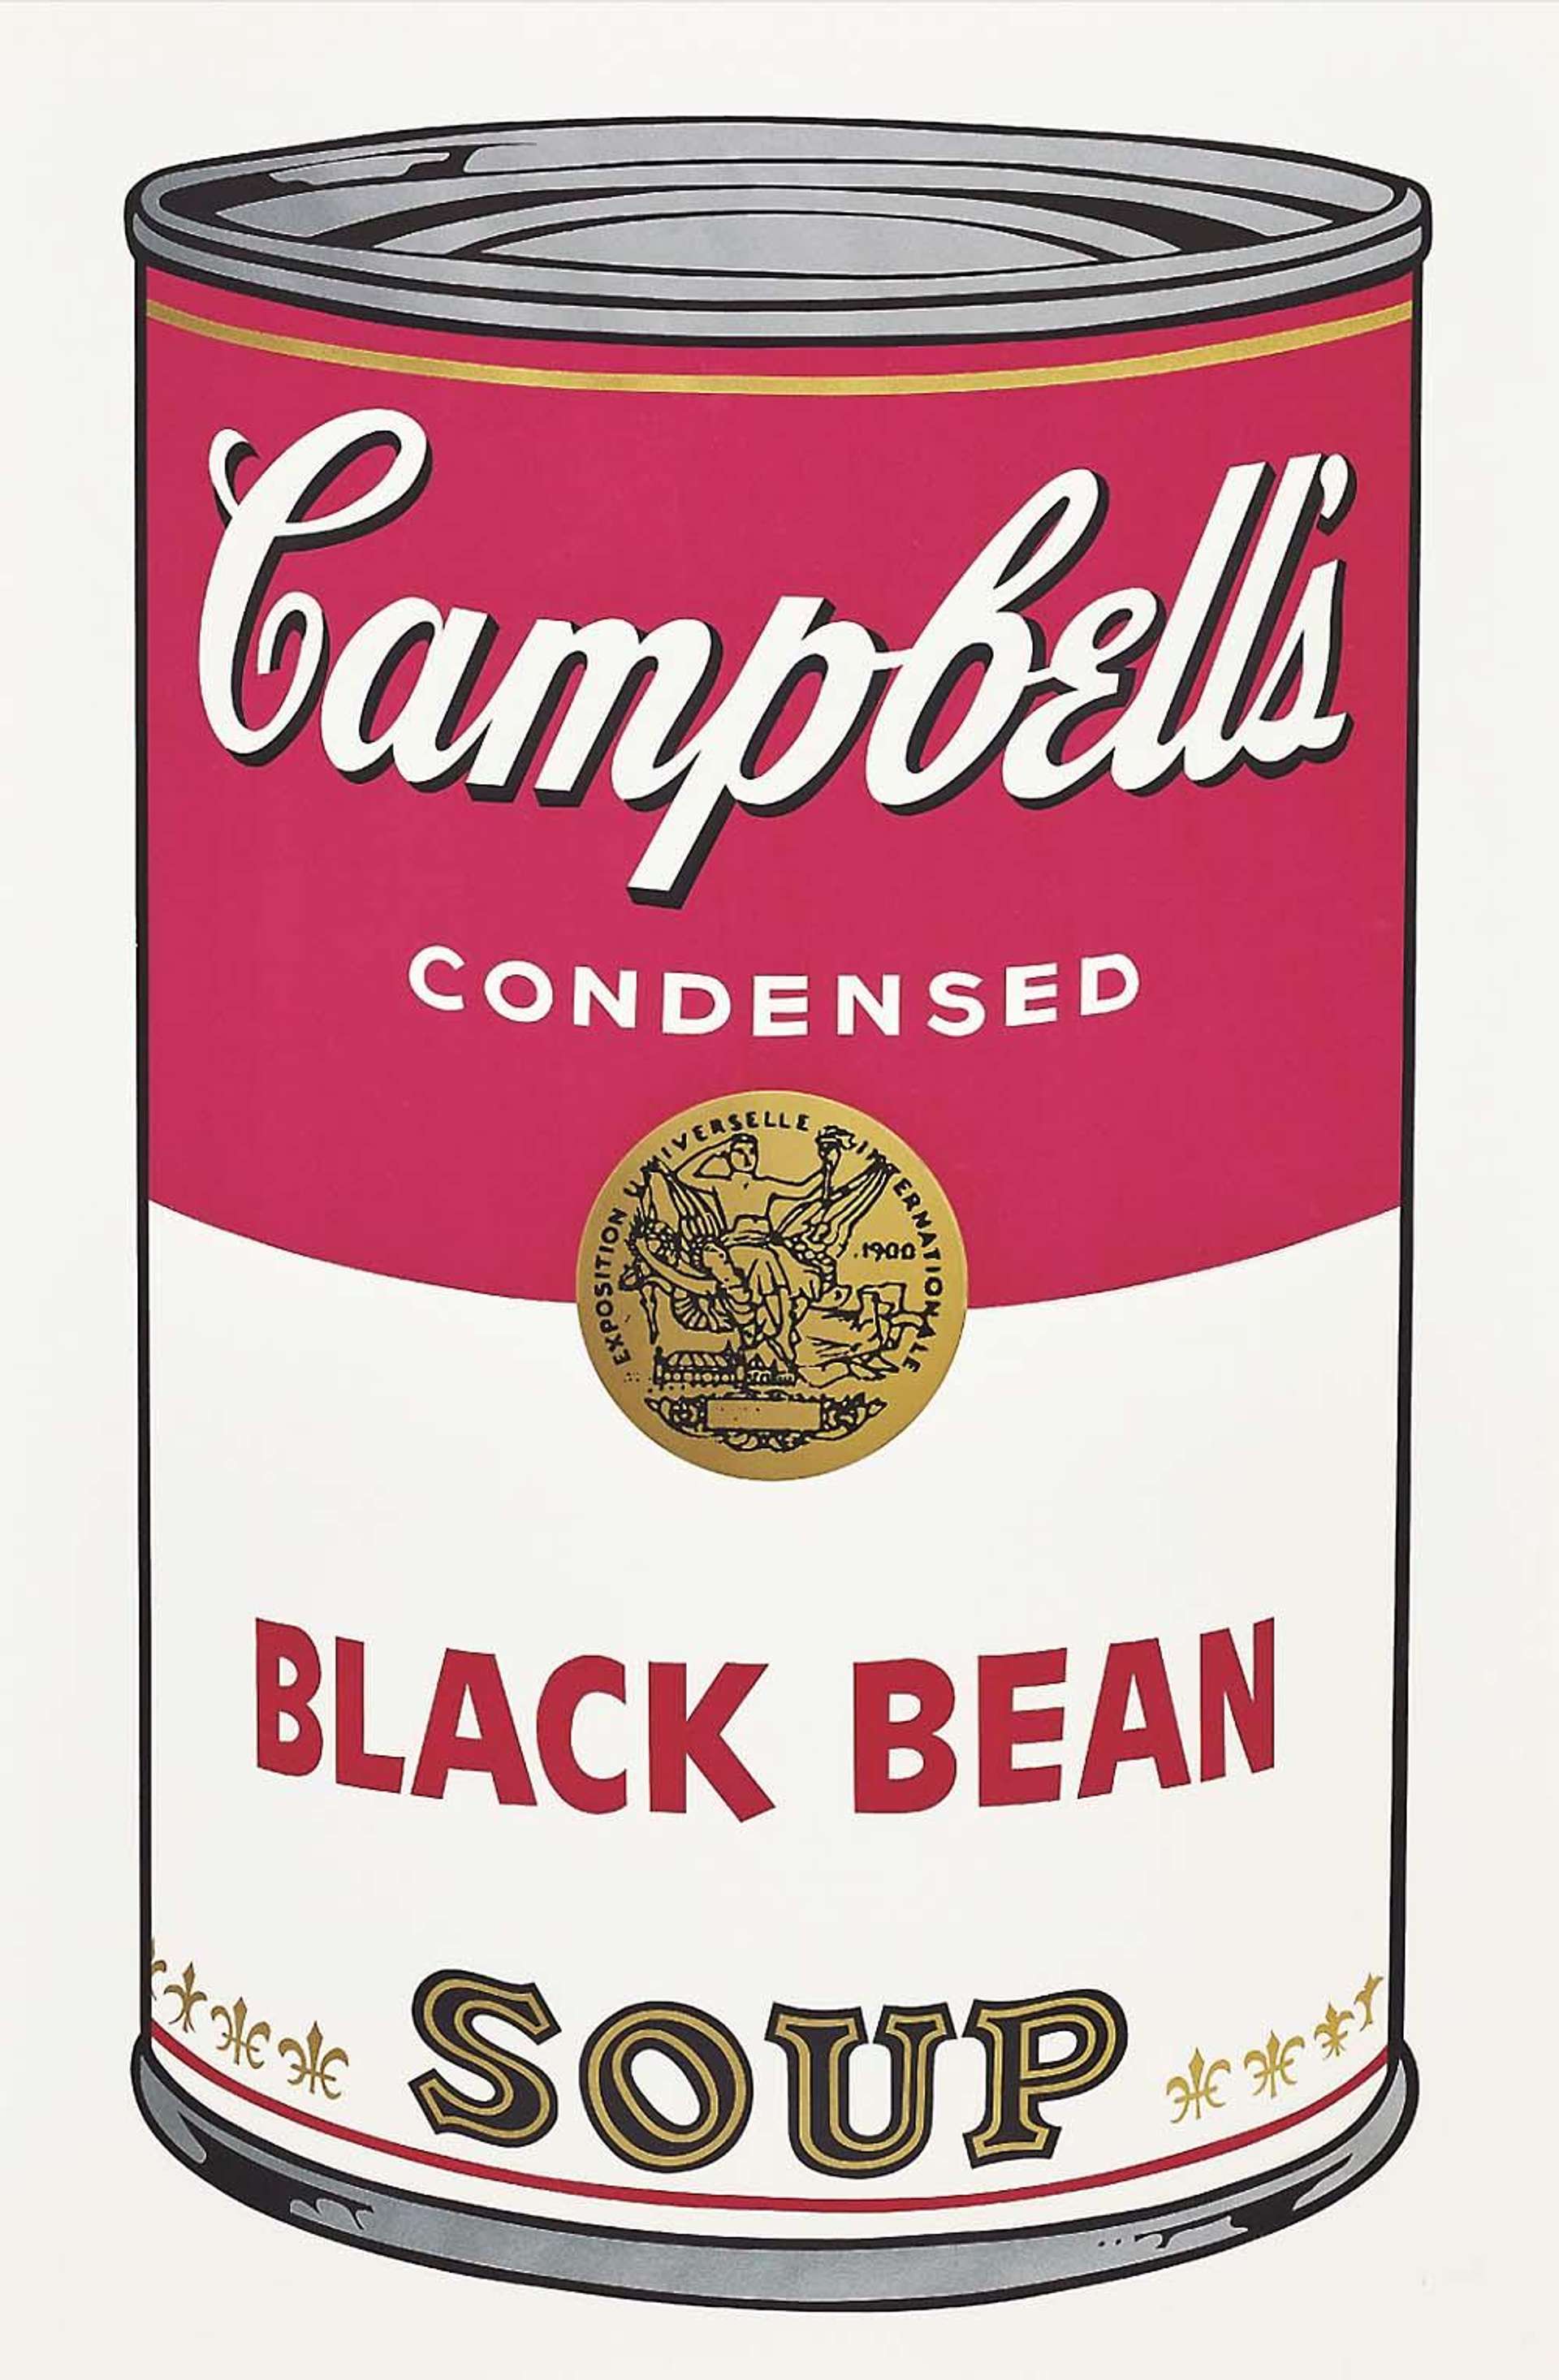 Andy Warhol: Campbell’s Soup I, Black Bean (F. & S. II.44) - Signed Print